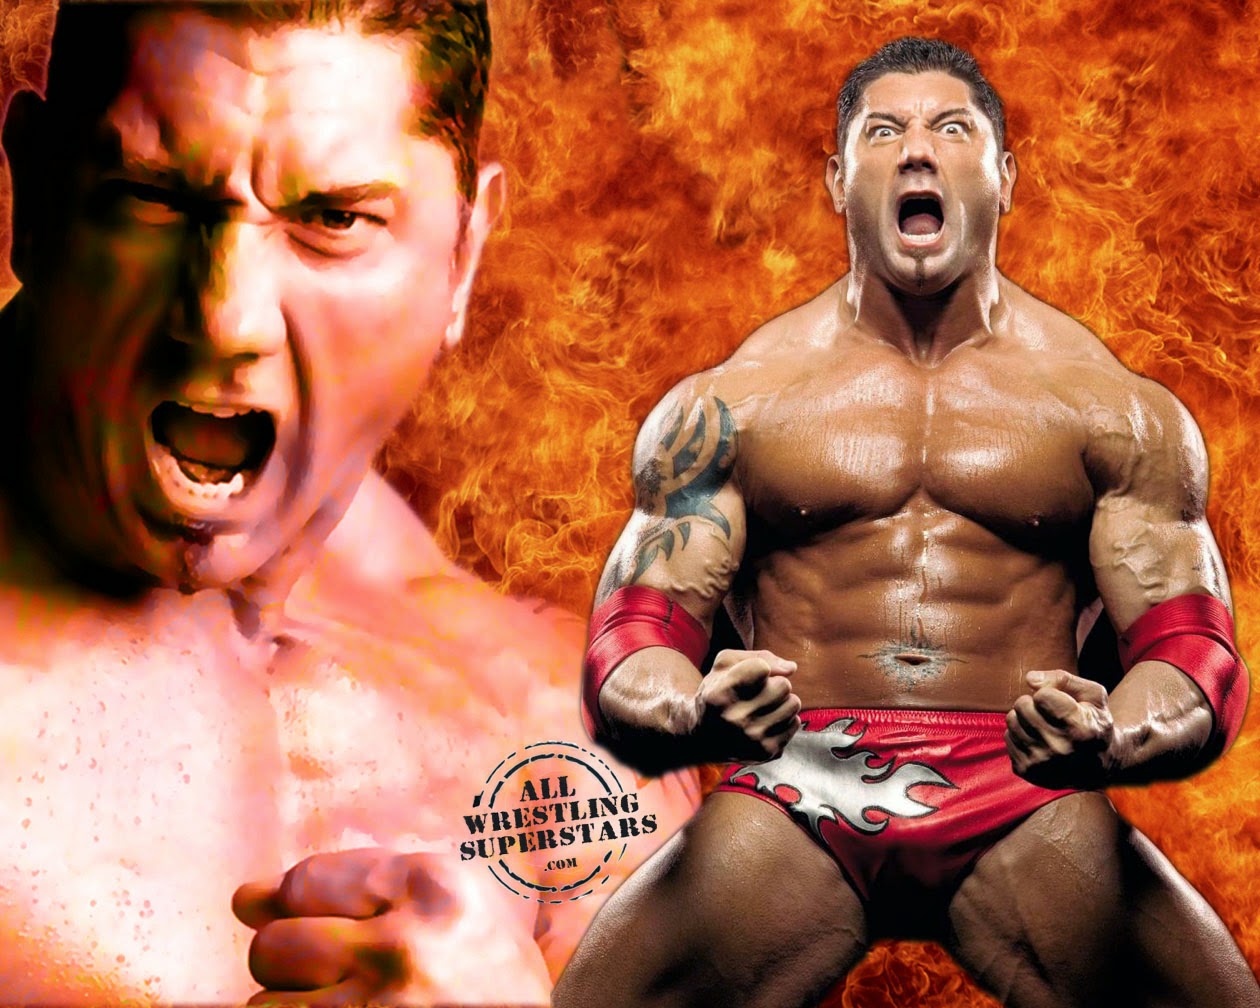 Dave Batista, WWE, Wallpaper, Photo, Images, Pics, Pictures, Widescreen, photograph, Fullscreen, Free Download HD Wallpapers